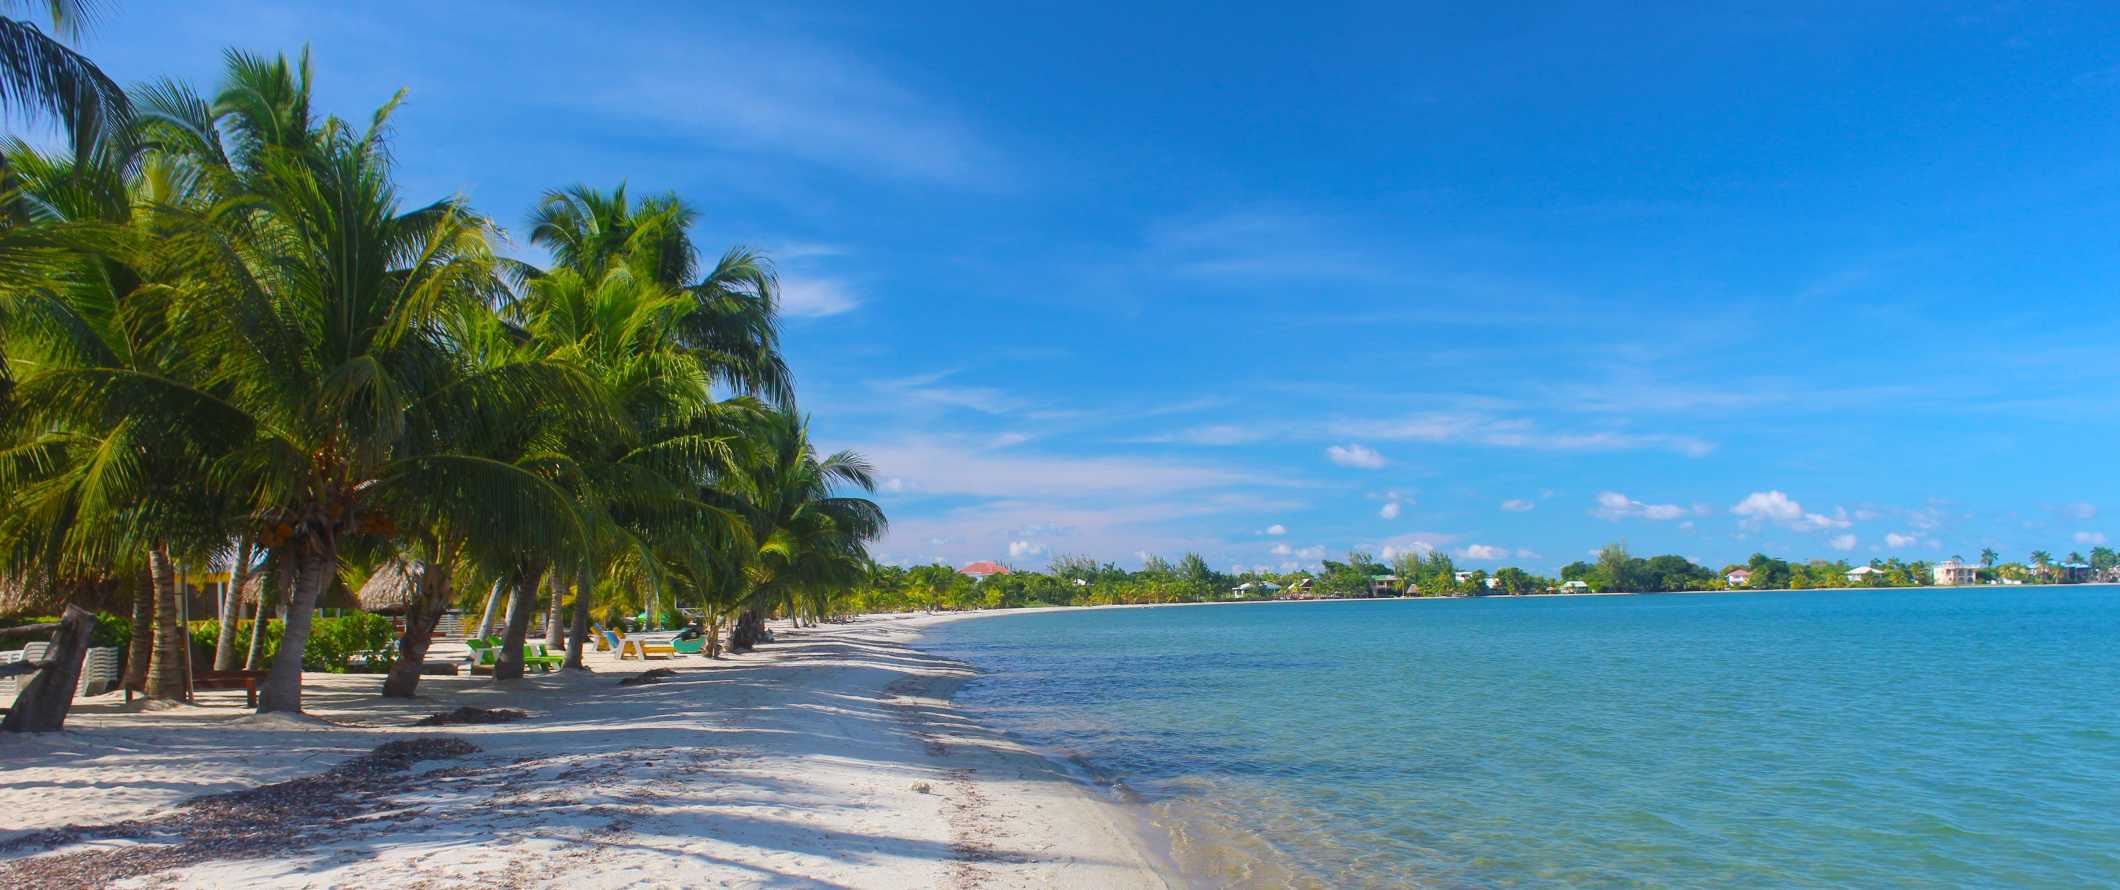 Picturesque beach lined with palms in Placencia, Belize